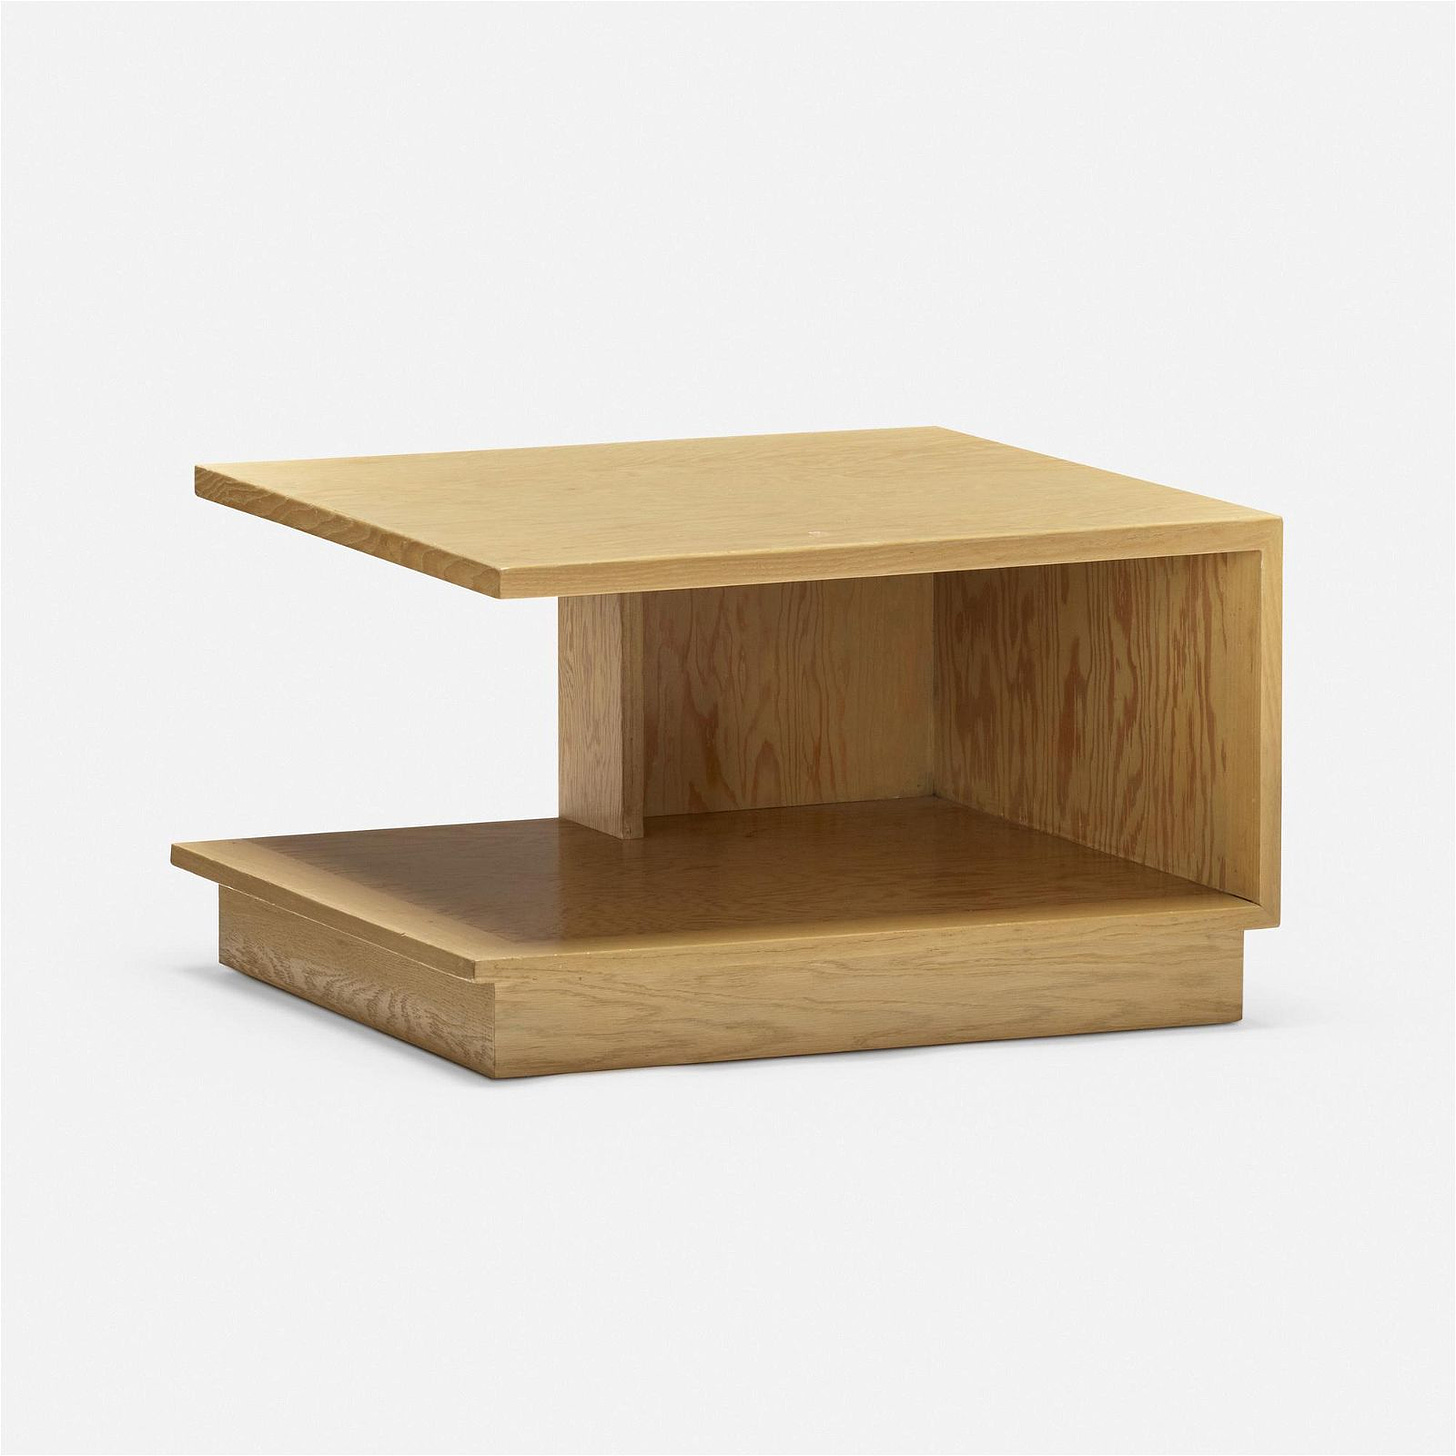 Rudolph M. Schindler, Cantilevered end table